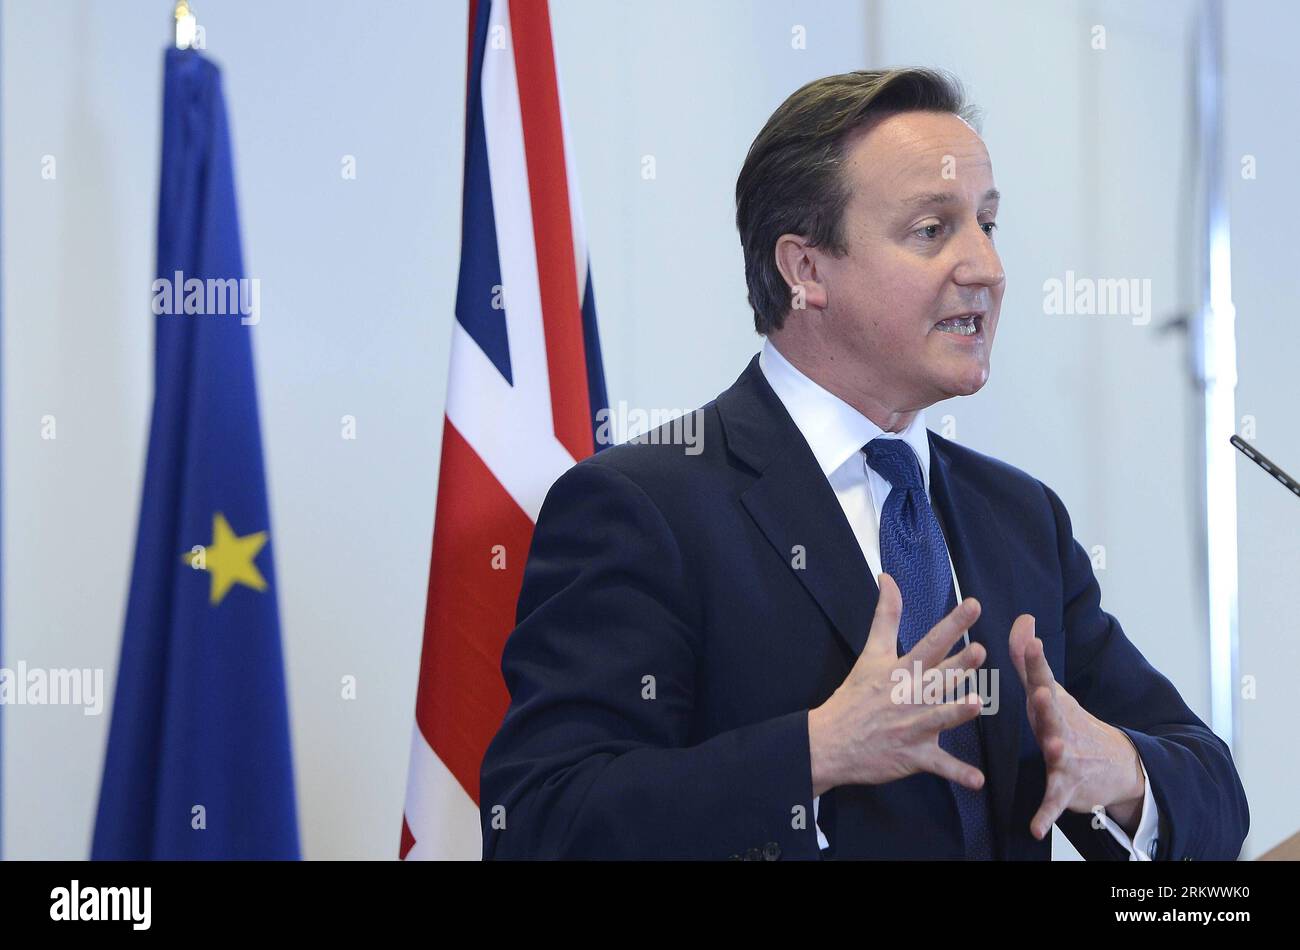 Bildnummer: 58757813  Datum: 23.11.2012  Copyright: imago/Xinhua (121123) -- BRUSSELS, Nov. 23, 2012 (Xinhua) -- British Prime Minister David Cameron attends a press conference at the end of an extraordinary EU summit in Brussels, capital of Belgium, on Nov. 23, 2012. Top leaders of the European Union (EU) failed to reach an agreement on the bloc s trillion-euro budget framework for 2014-2020 at a two-day special summit in Brussels, with its negotiations postponed until early next year, President of European Council HermanxVanxRompuy said here on Friday afternoon. (Xinhua/Wu Wei)(yt) BELGIUM-E Stock Photo